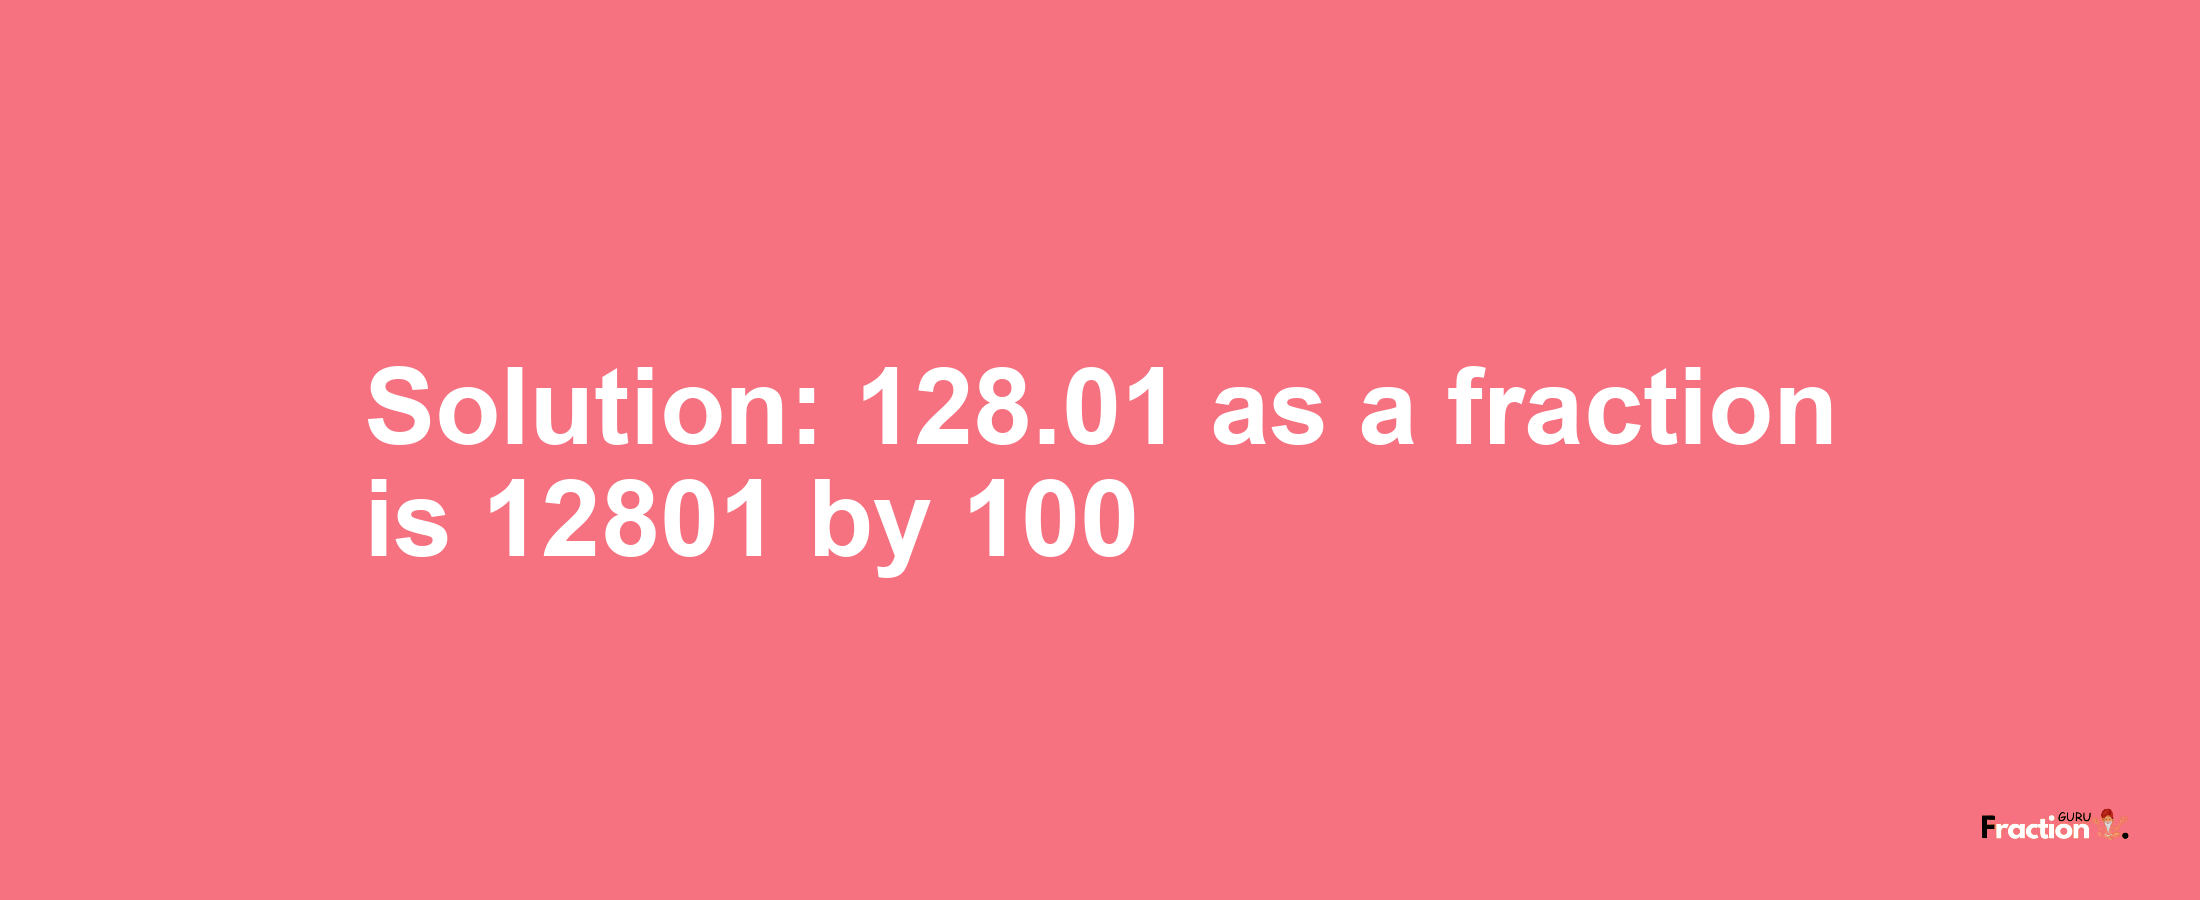 Solution:128.01 as a fraction is 12801/100